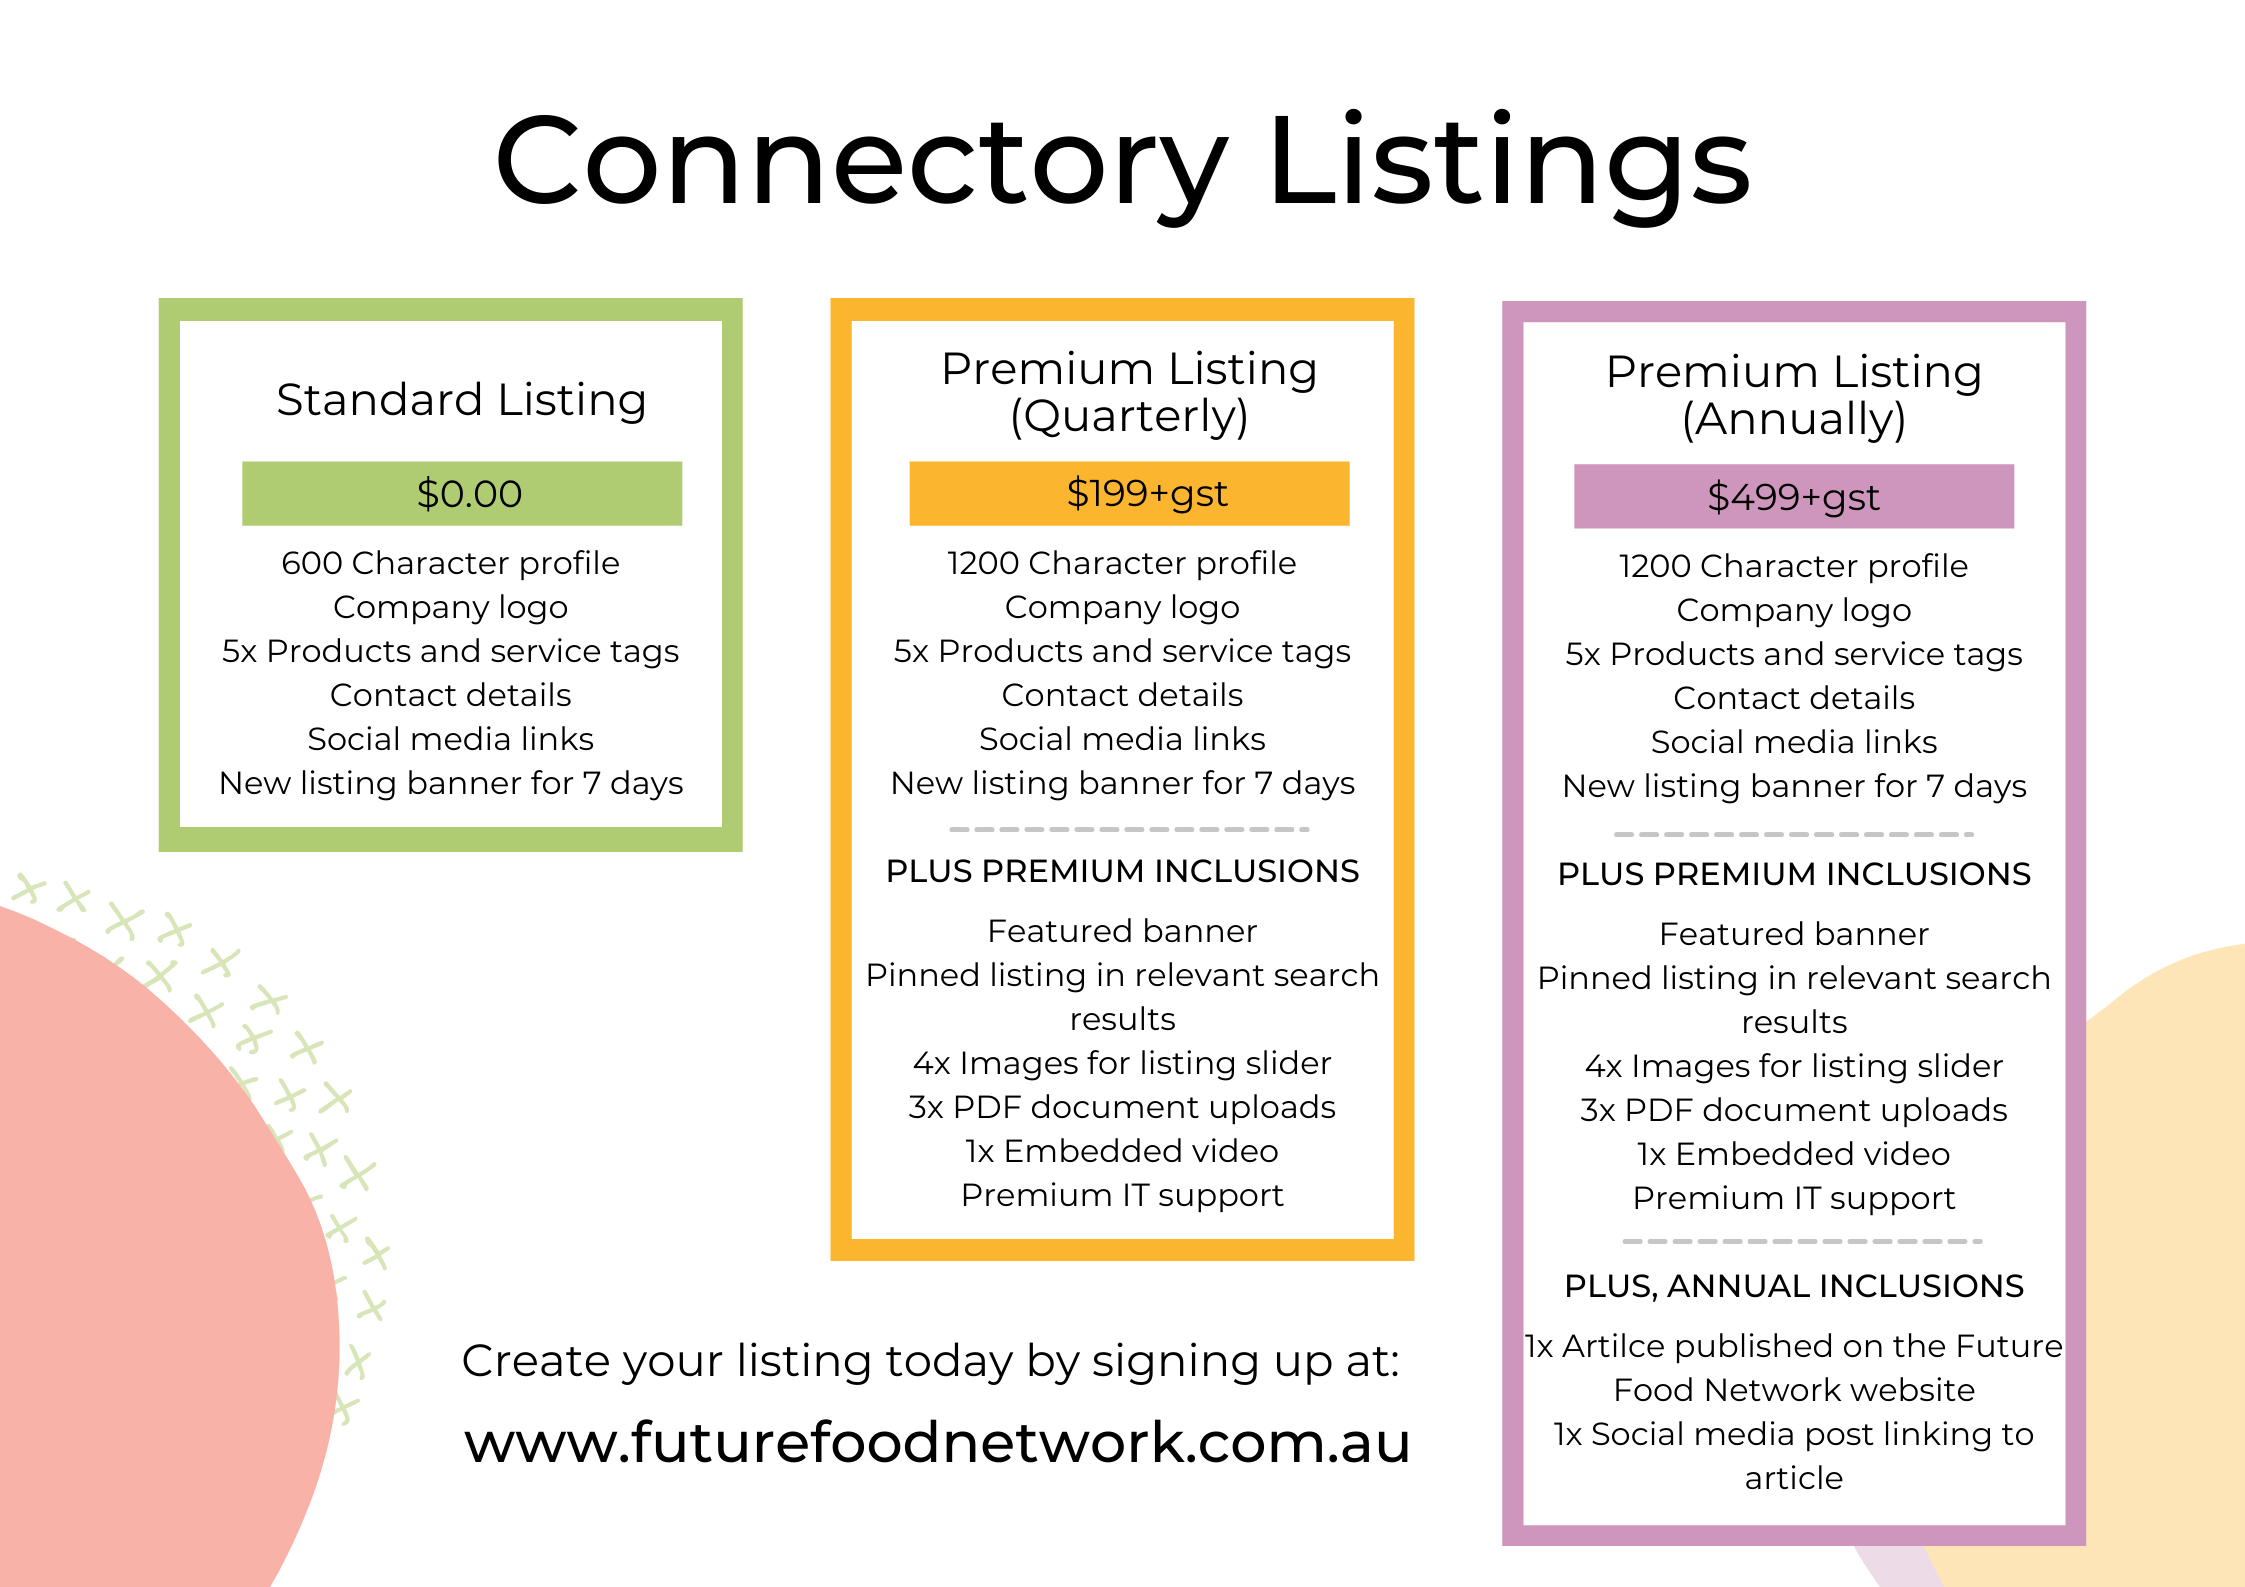 Connectory Listing inclusions